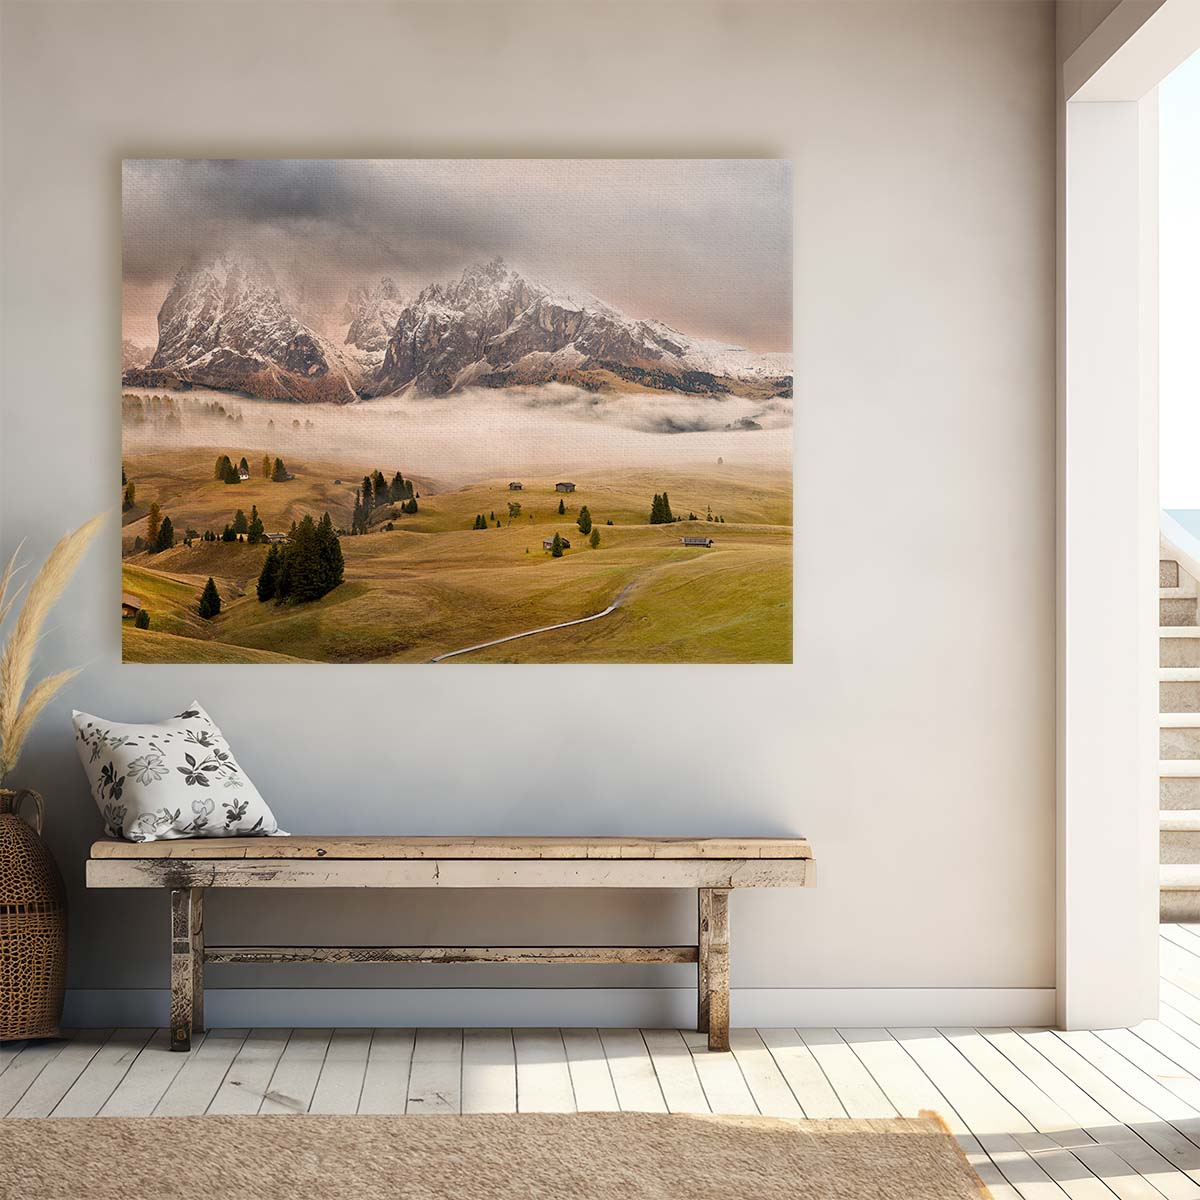 Mystical Dolomites Peaks & Autumn Cottages Wall Art by Luxuriance Designs. Made in USA.